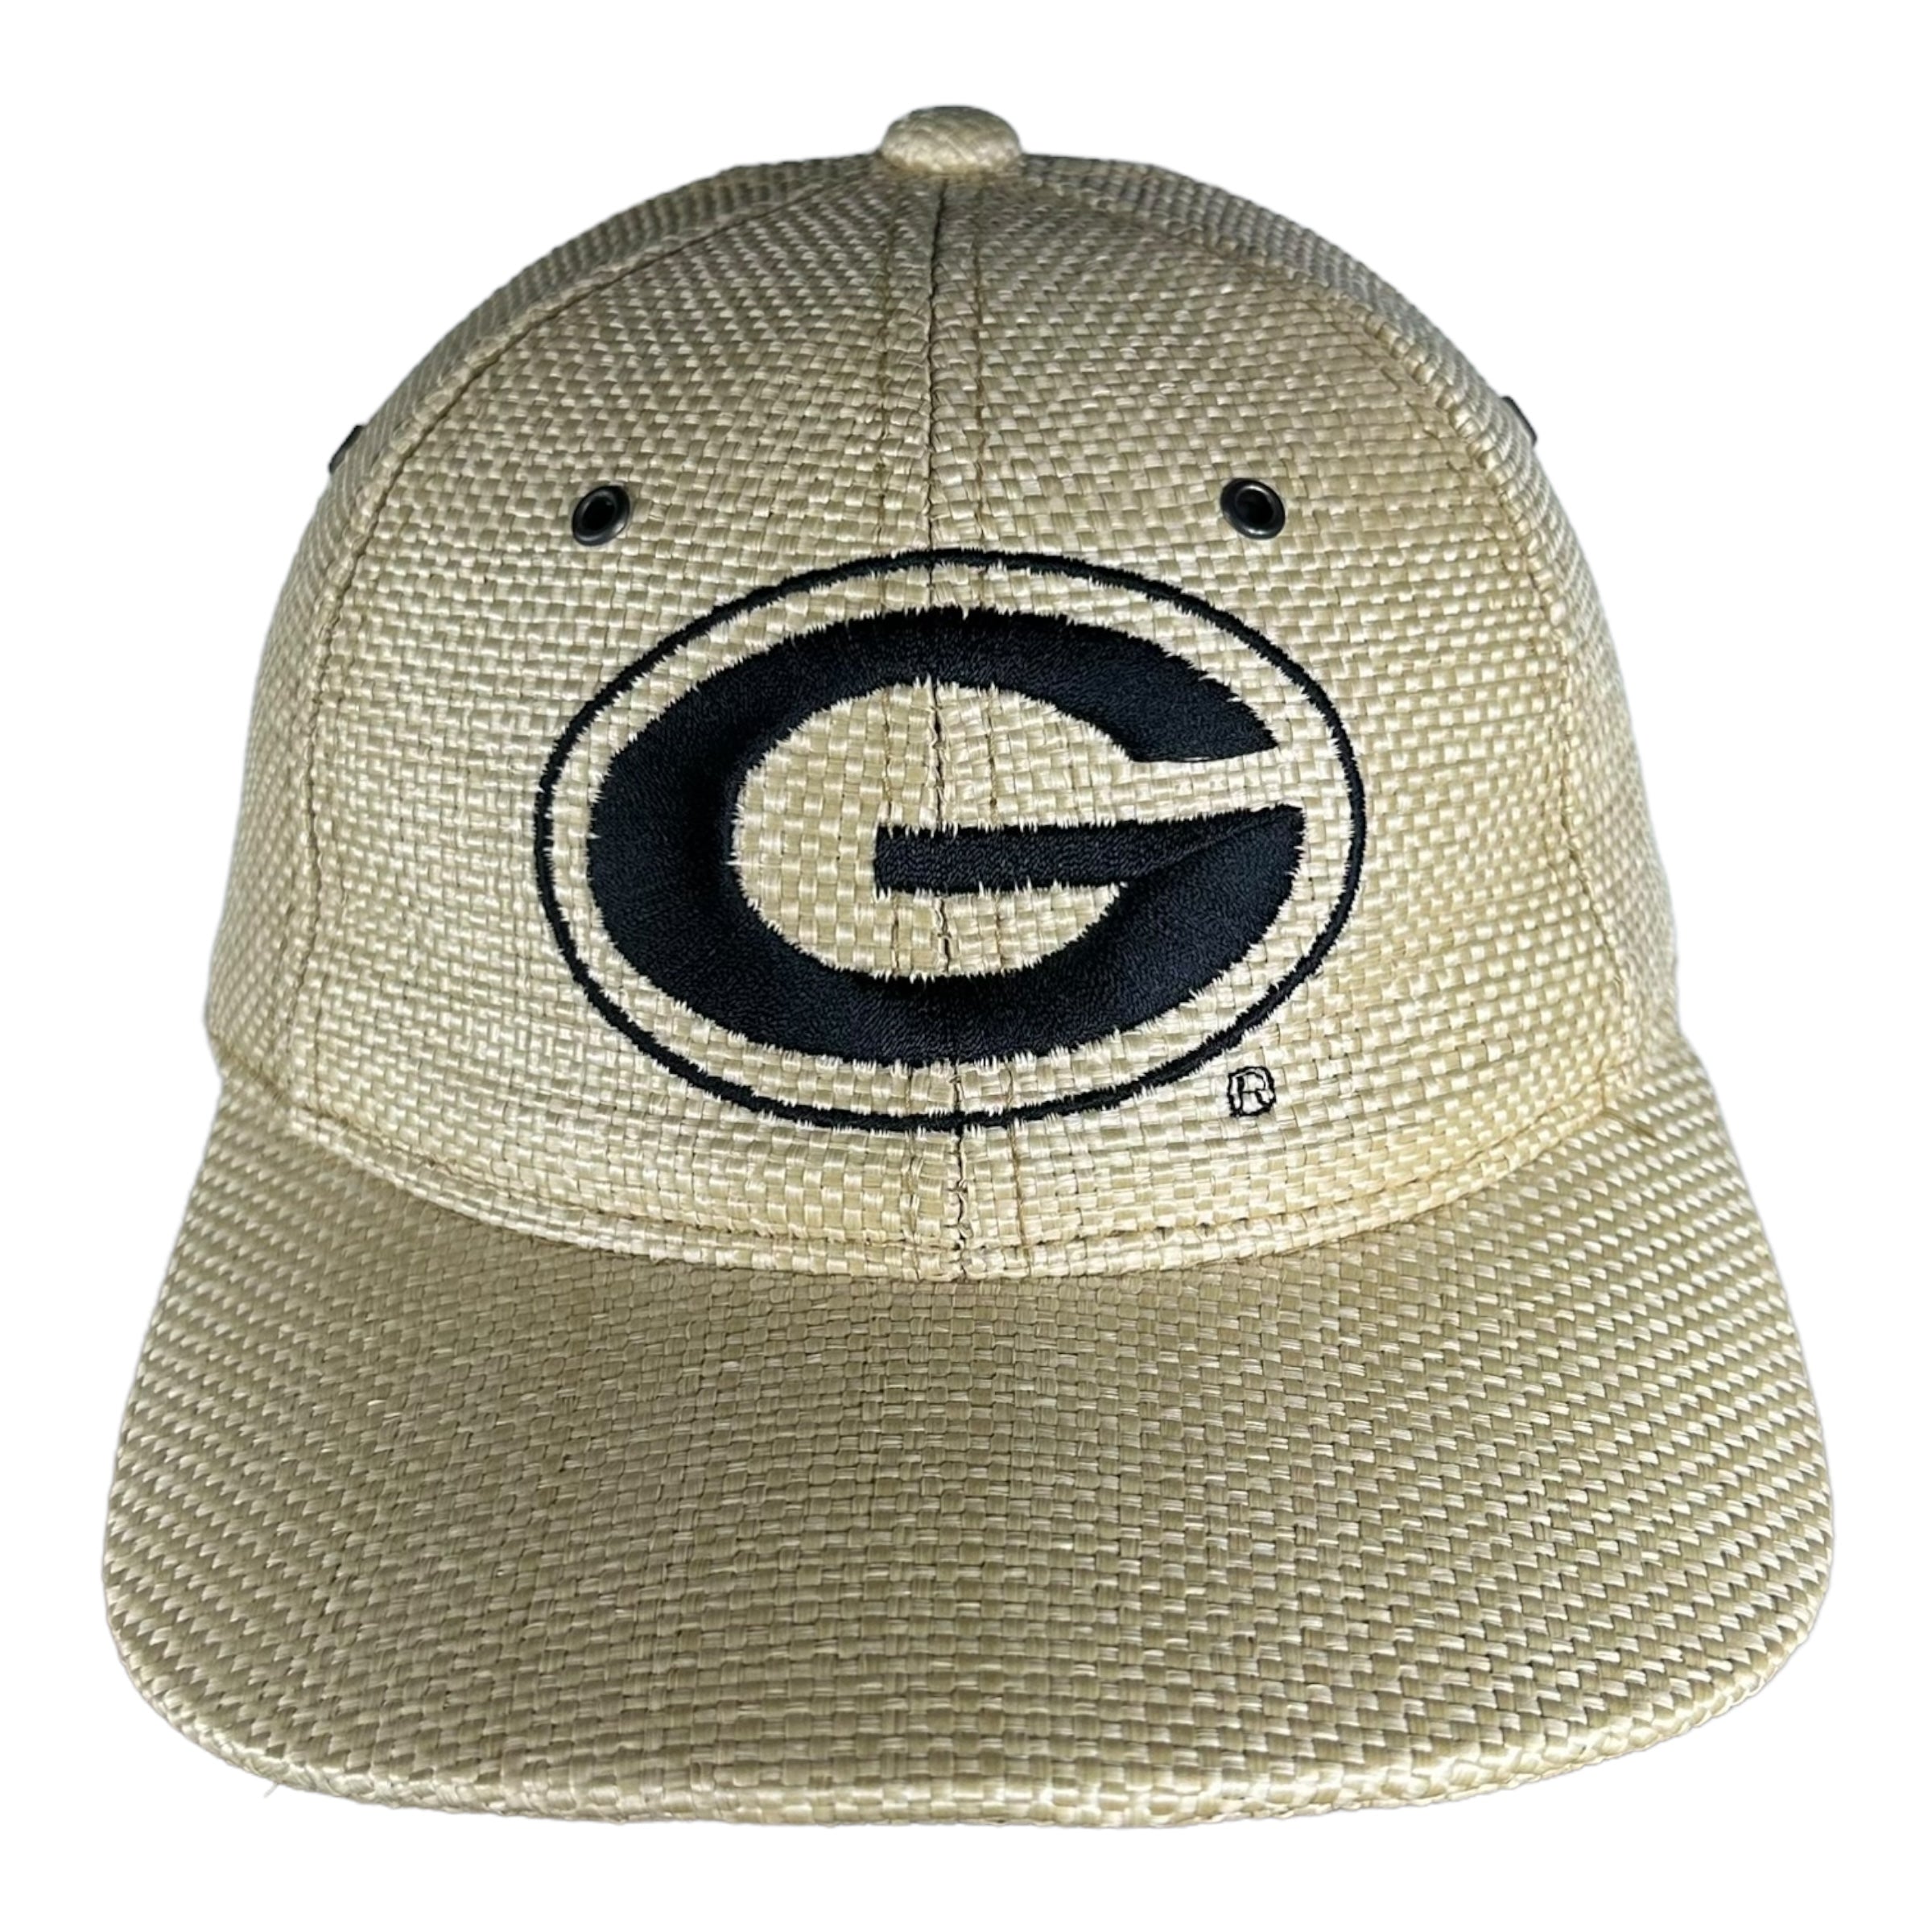 Vintage NFL Green Bay Packers Woven Strapback Hat